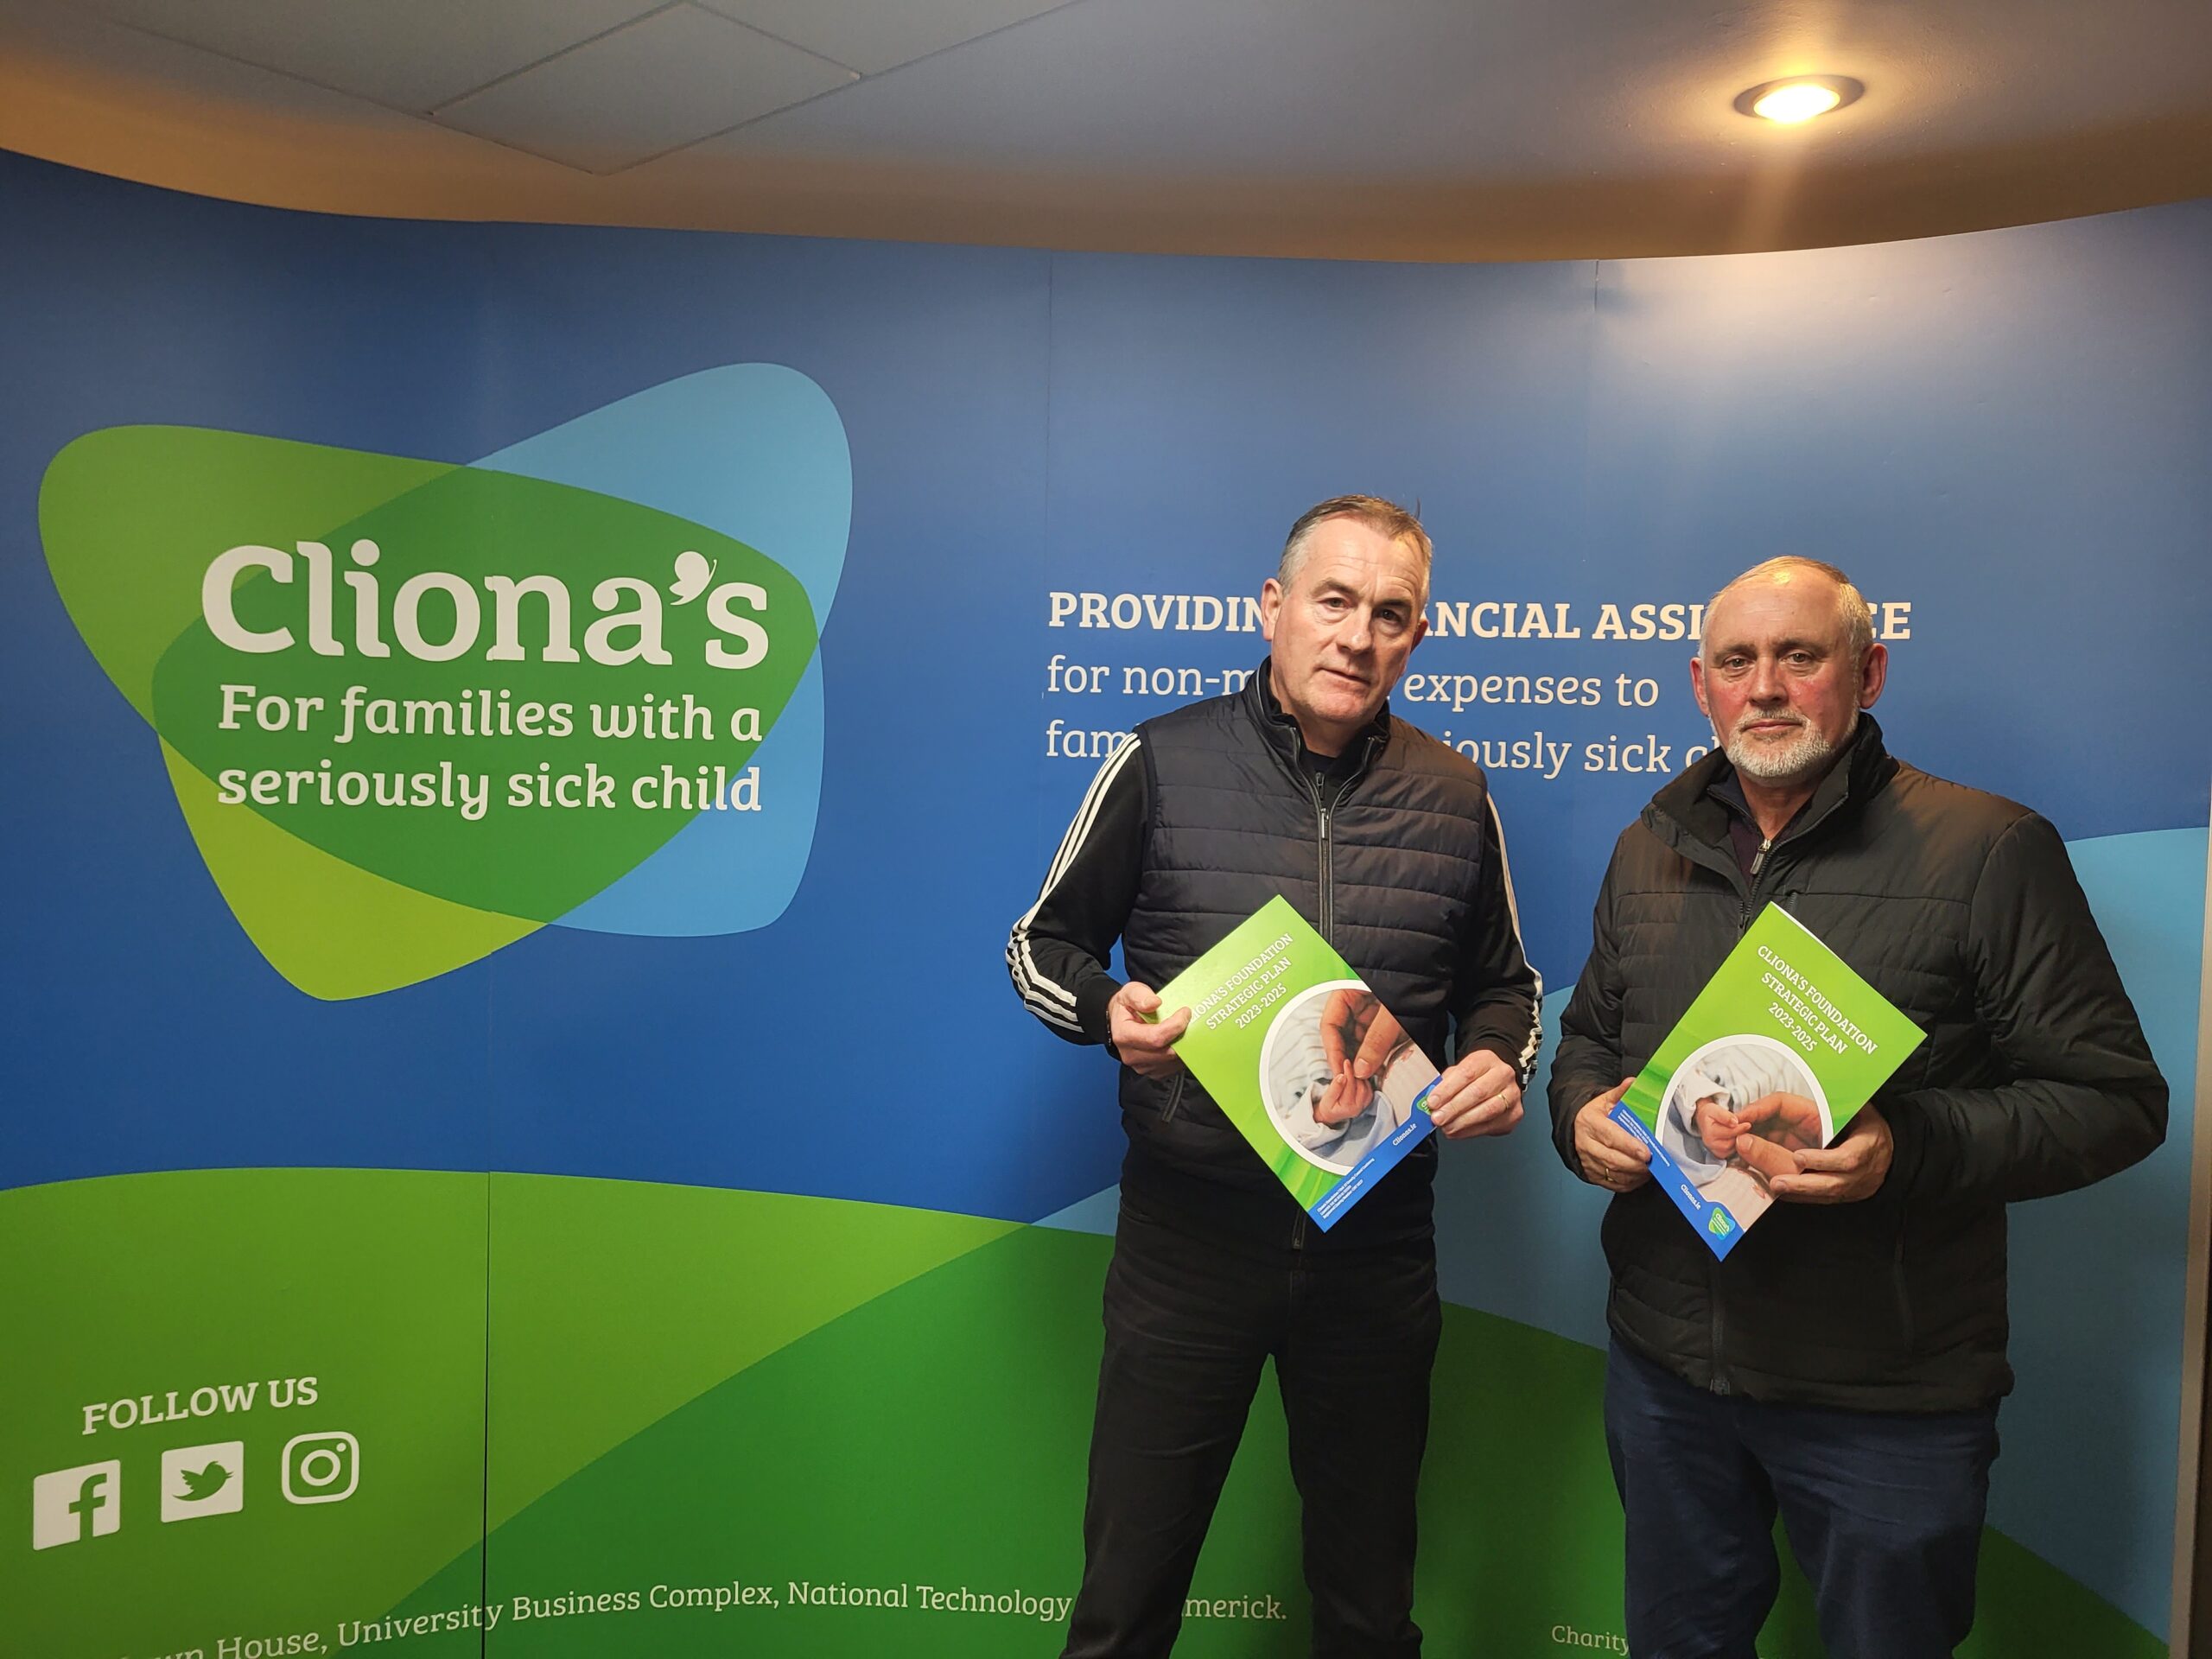 Cliona’s Foundation strategic plan aims to expand support for 4,000 families